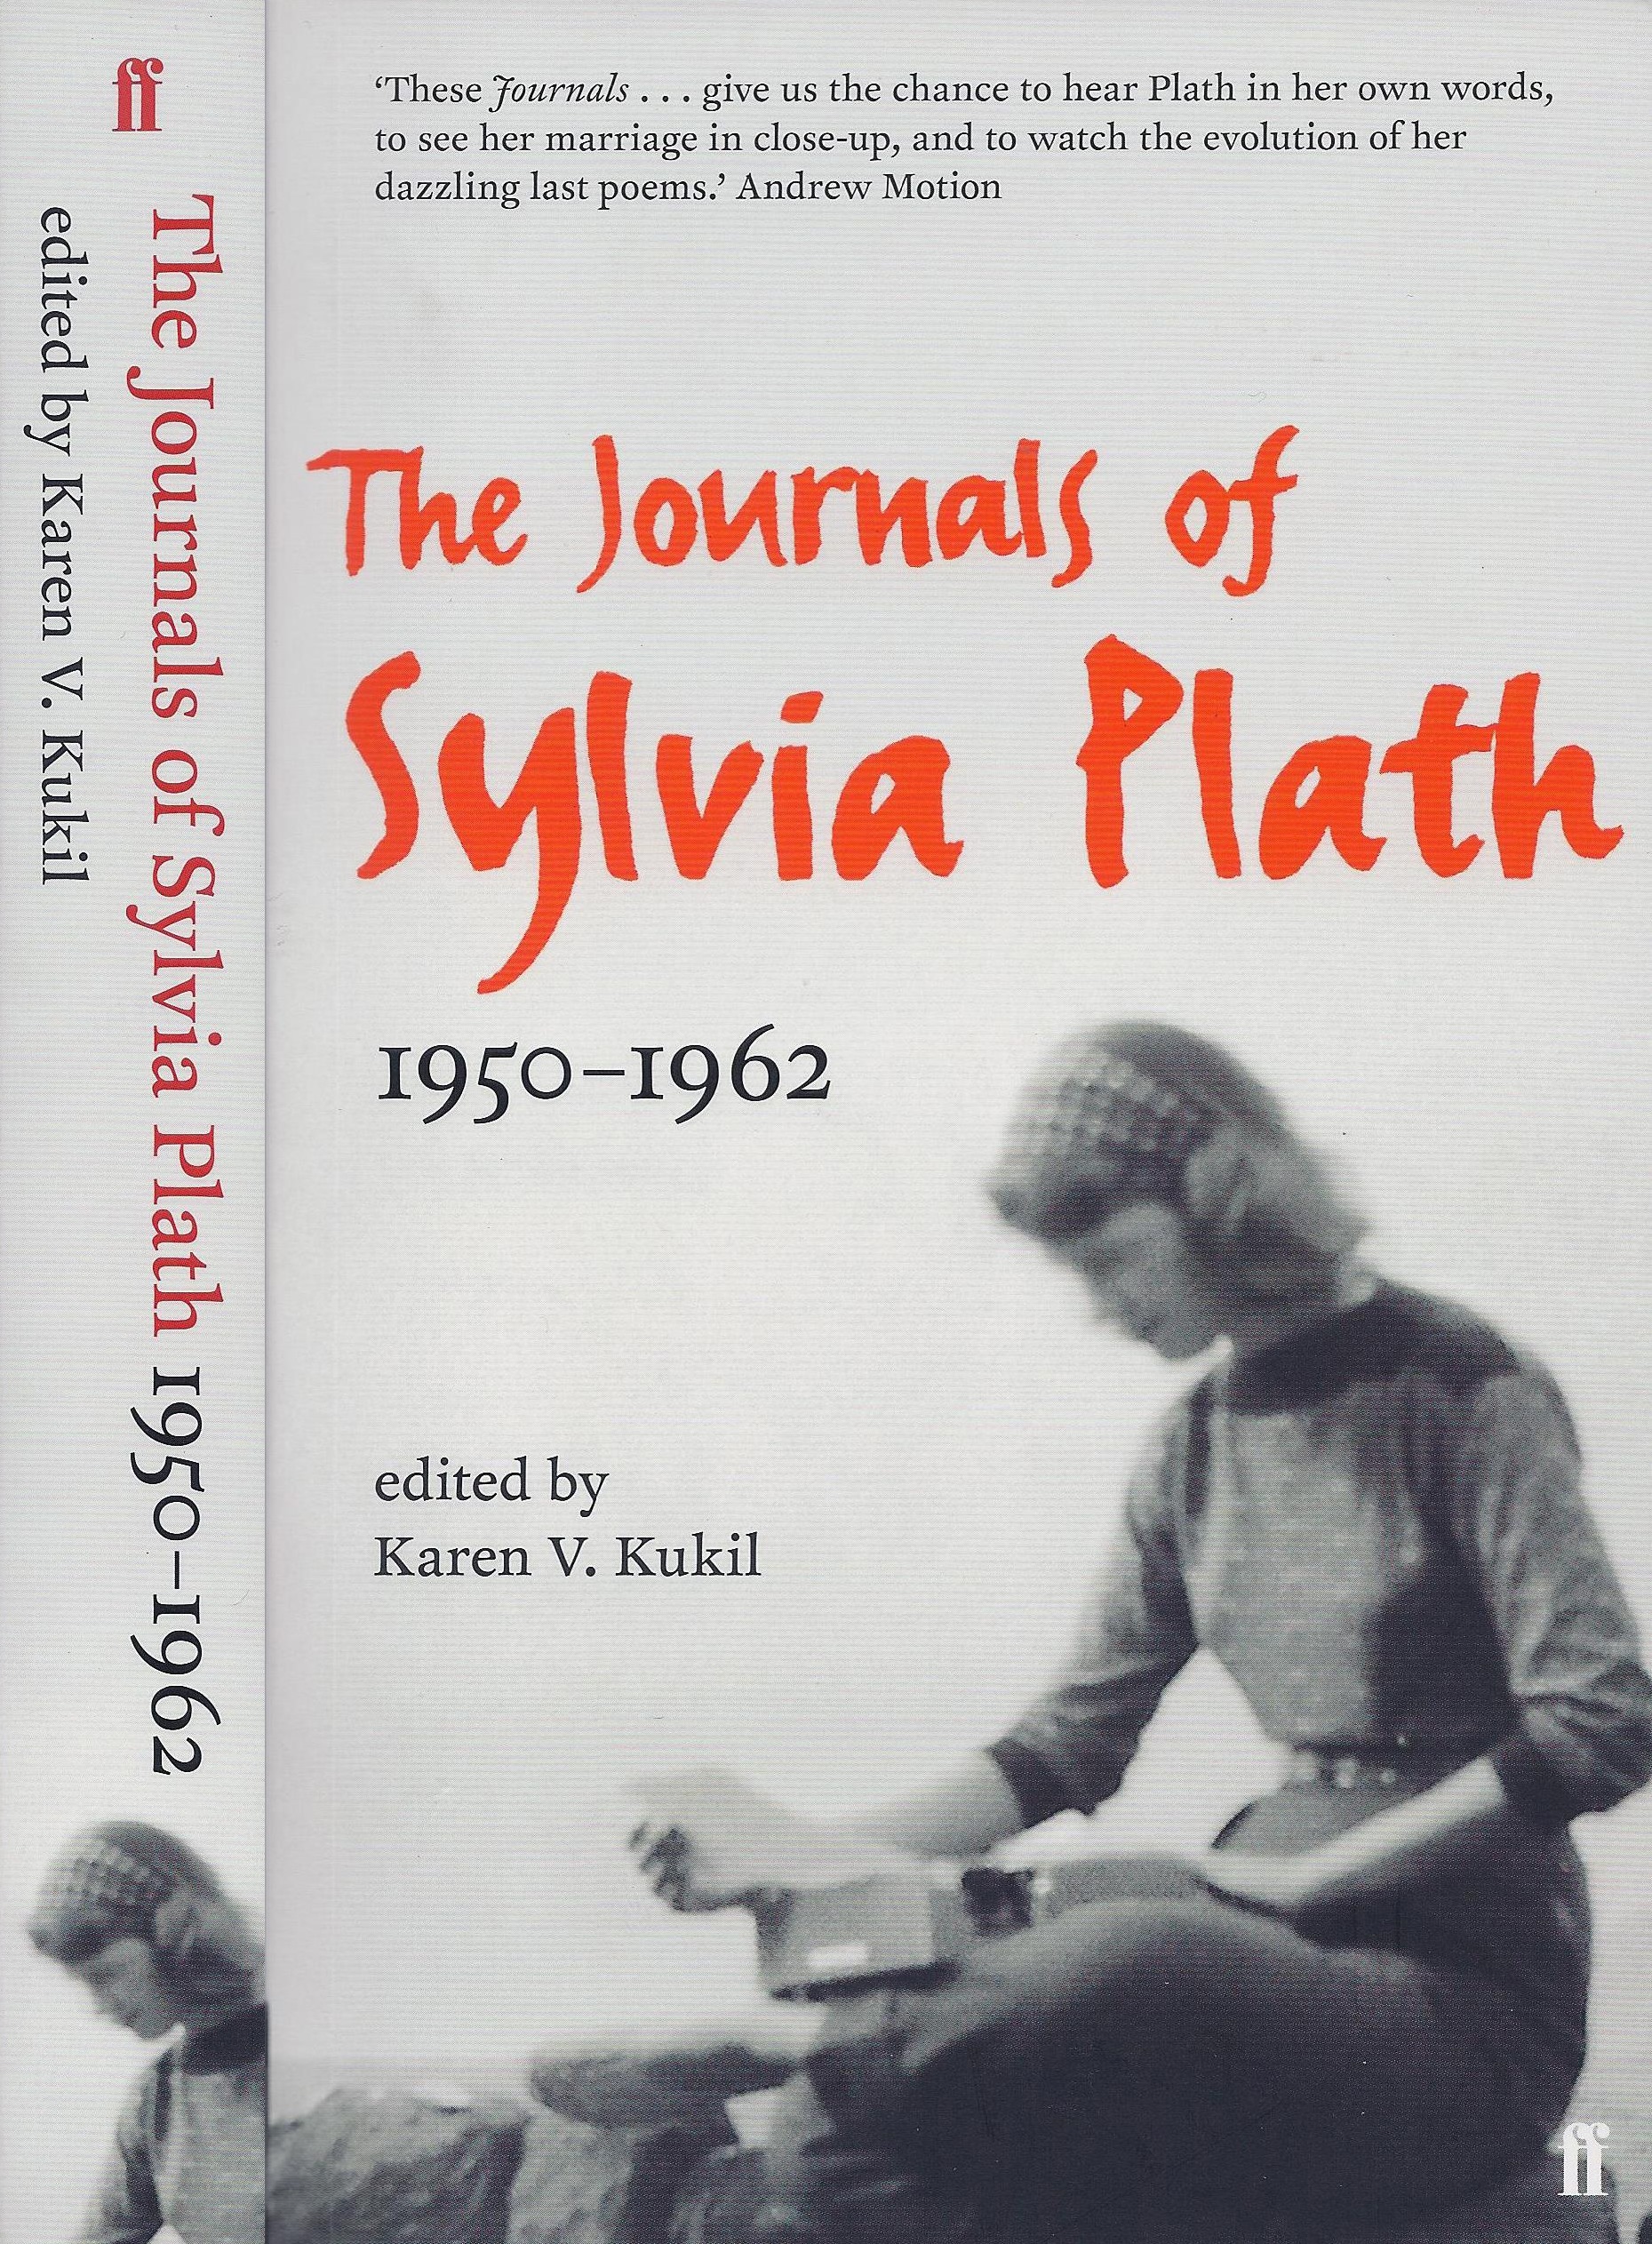 Harper Publishes 50th Anniversary edition of Sylvia Plath's The Bell Jar